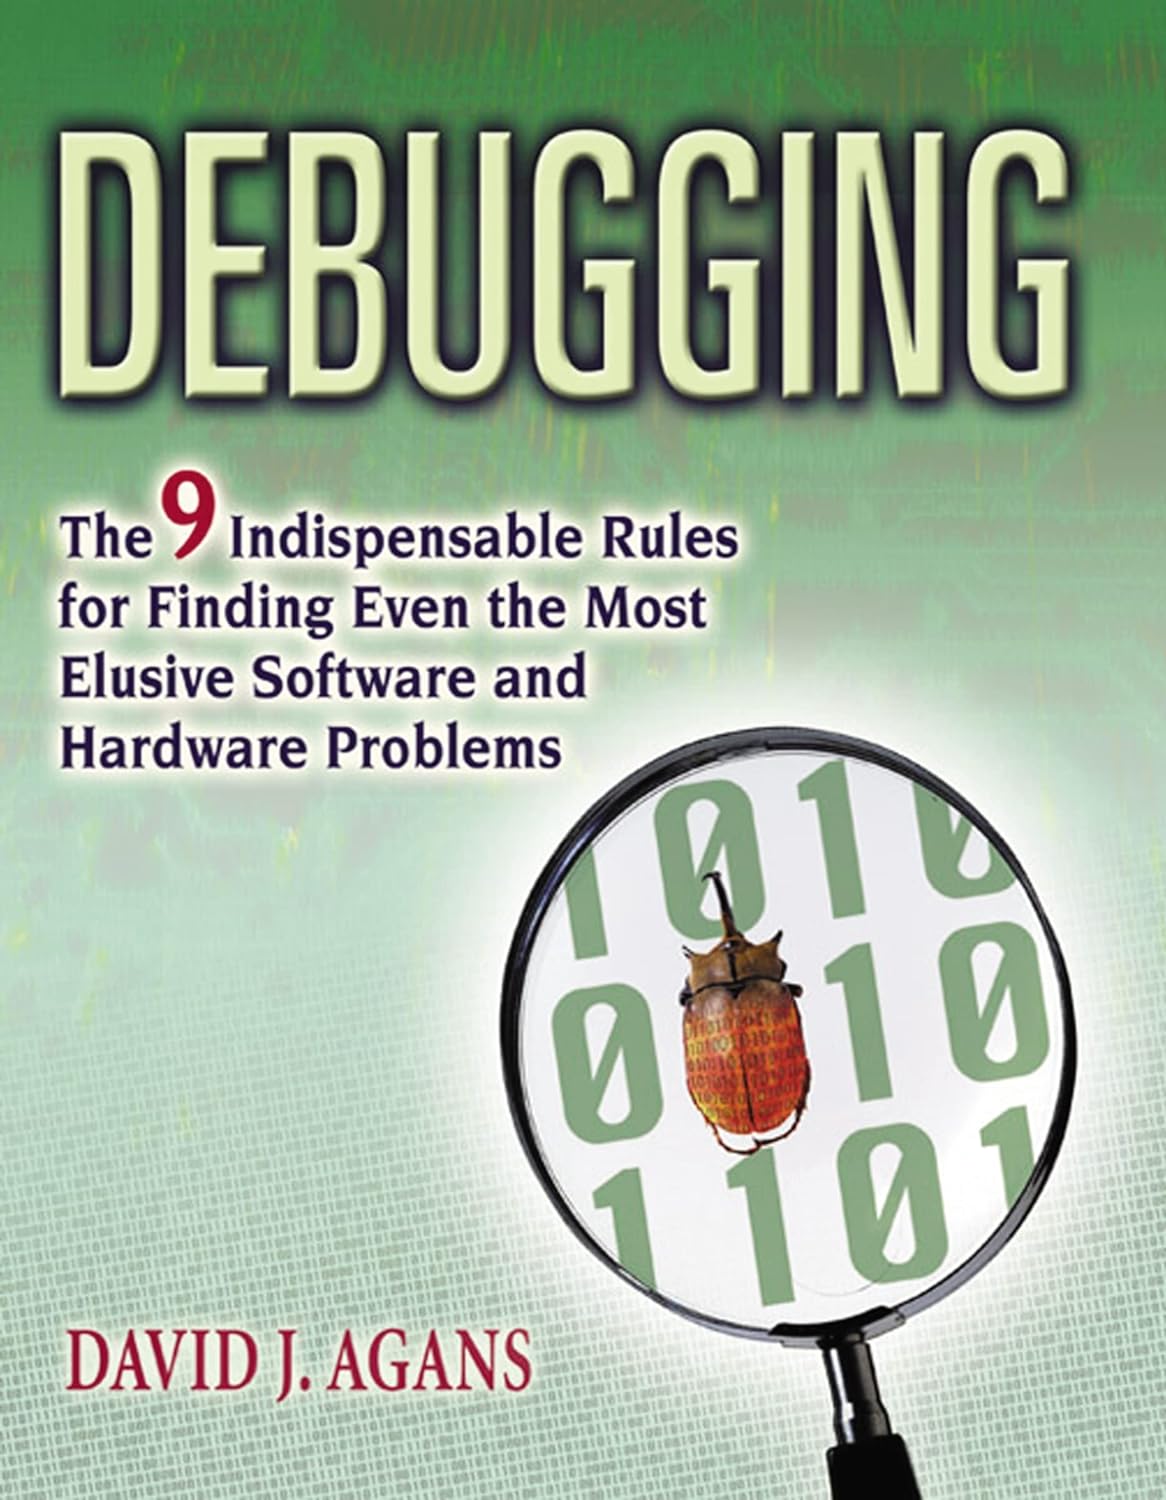 David J. Agans: Debugging : the 9 indispensable rules for finding even the most elusive software and hardware problems